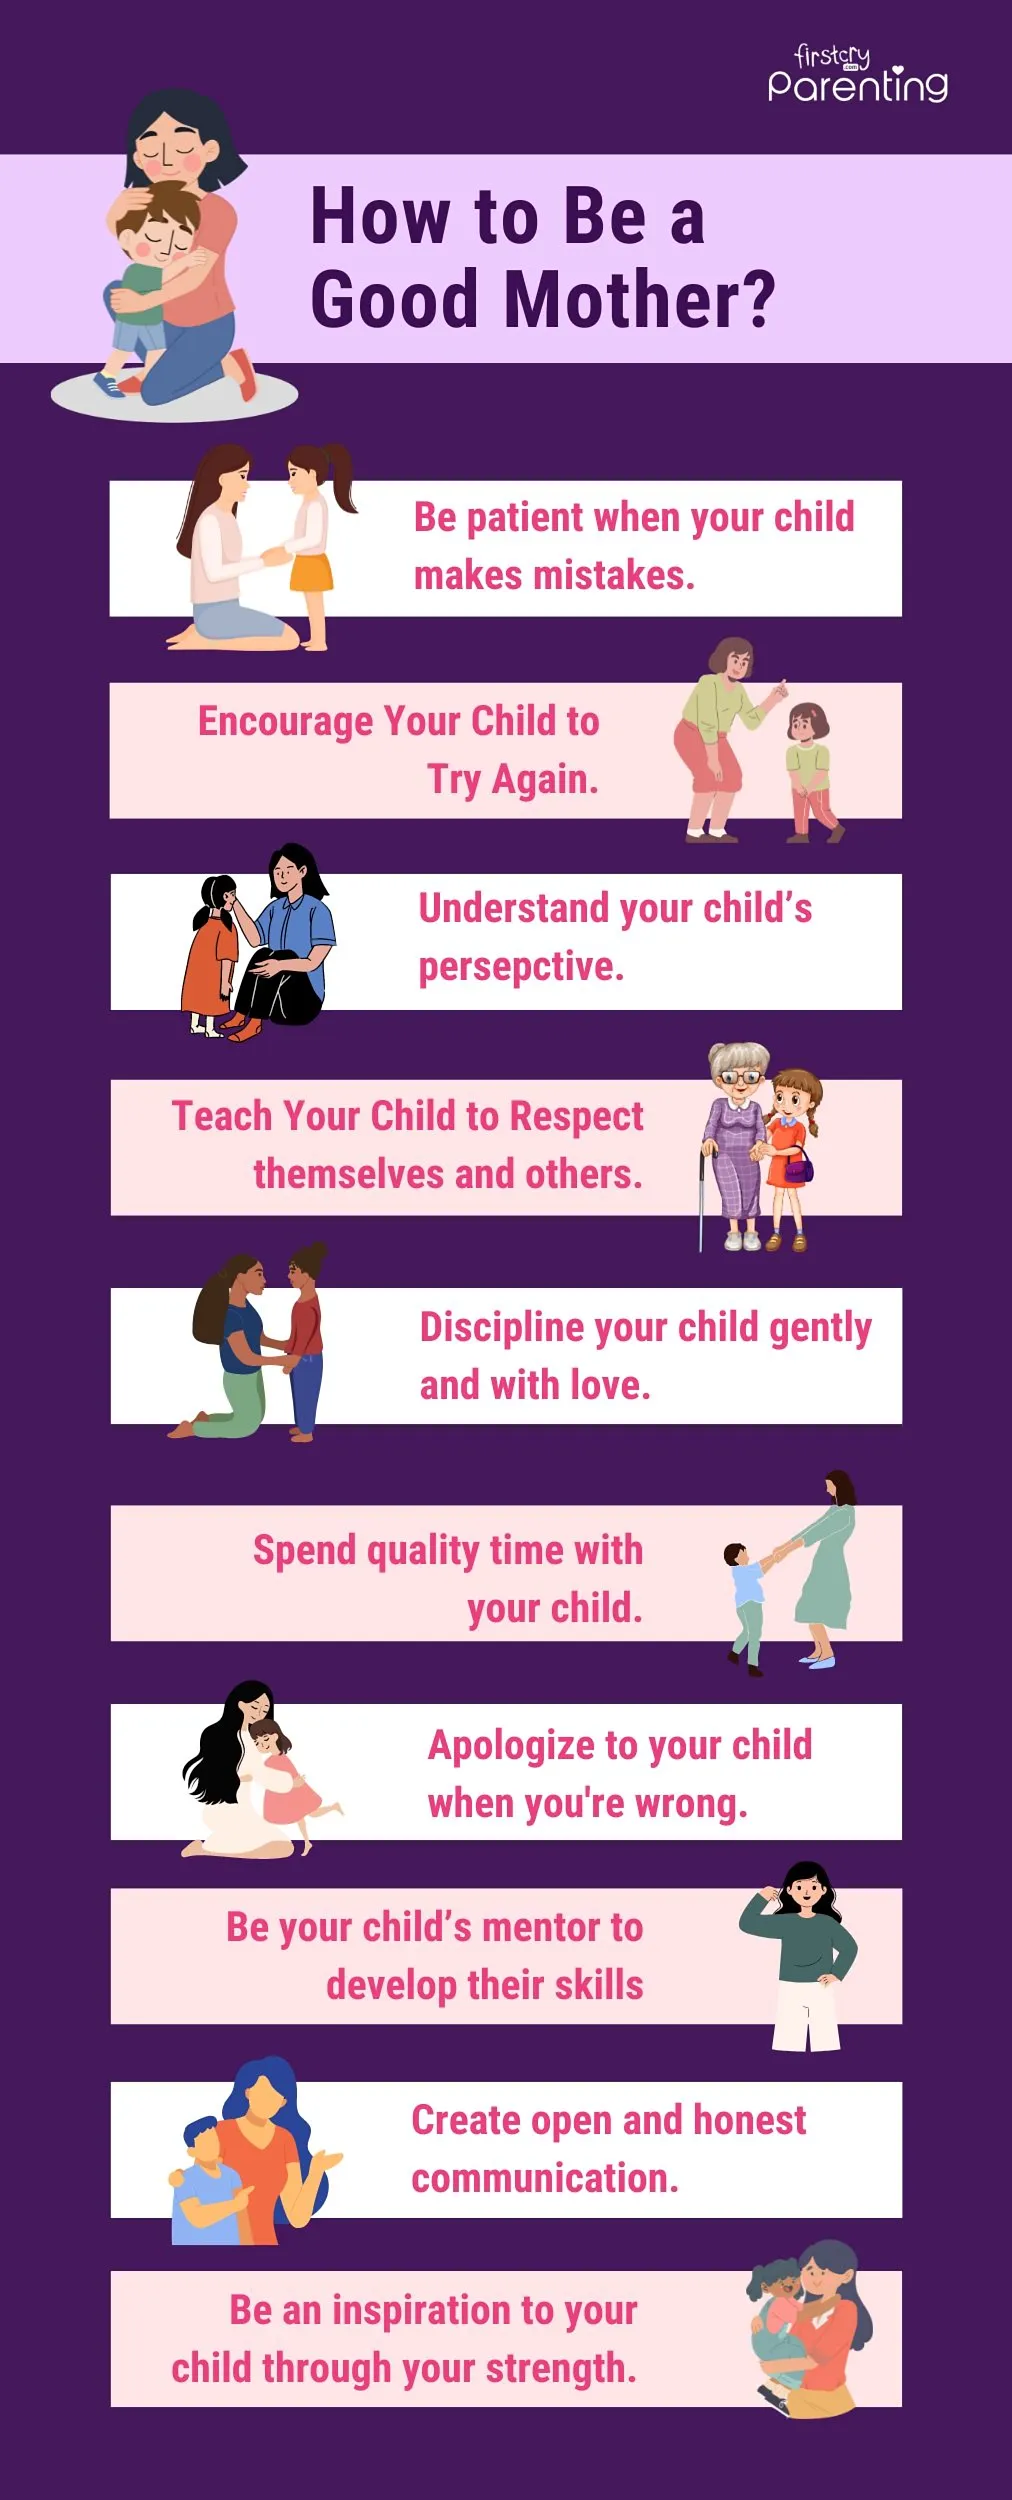 15 Tips on How to Be a Good Mother